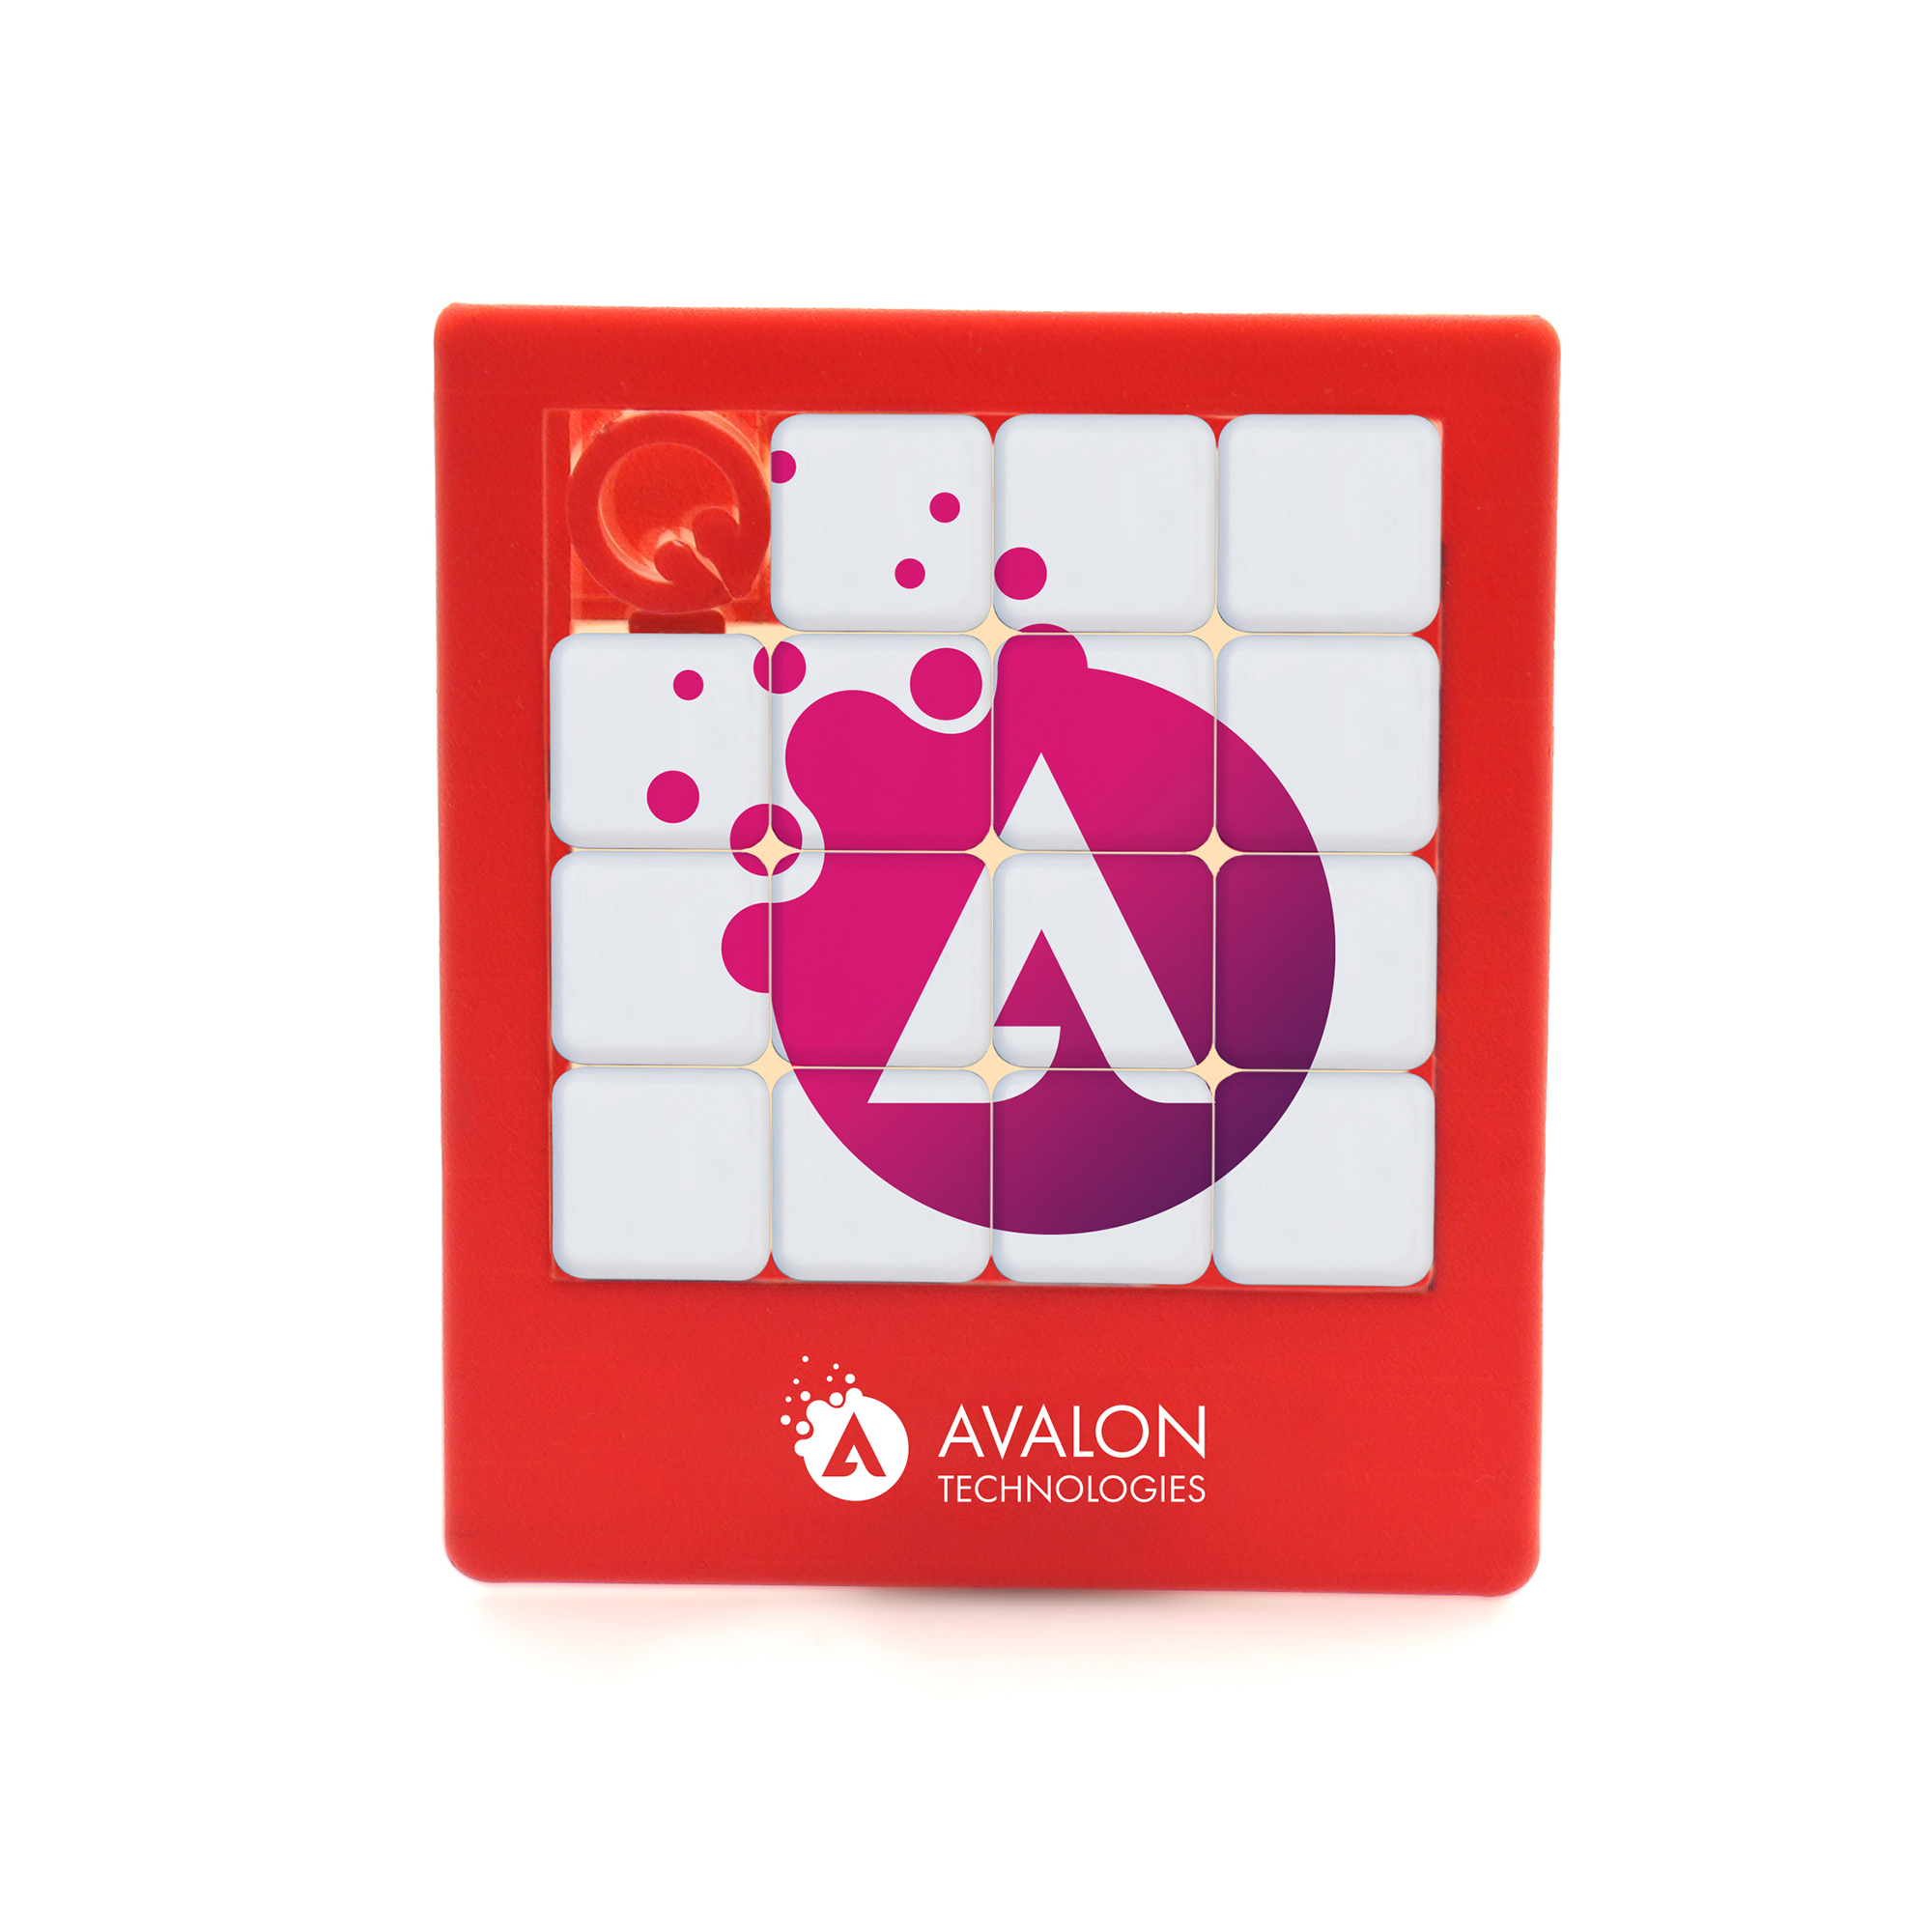 Sliding tile puzzle with full colour bespoke print. An exciting way to promote your brand, ideal for kids and adults alike.